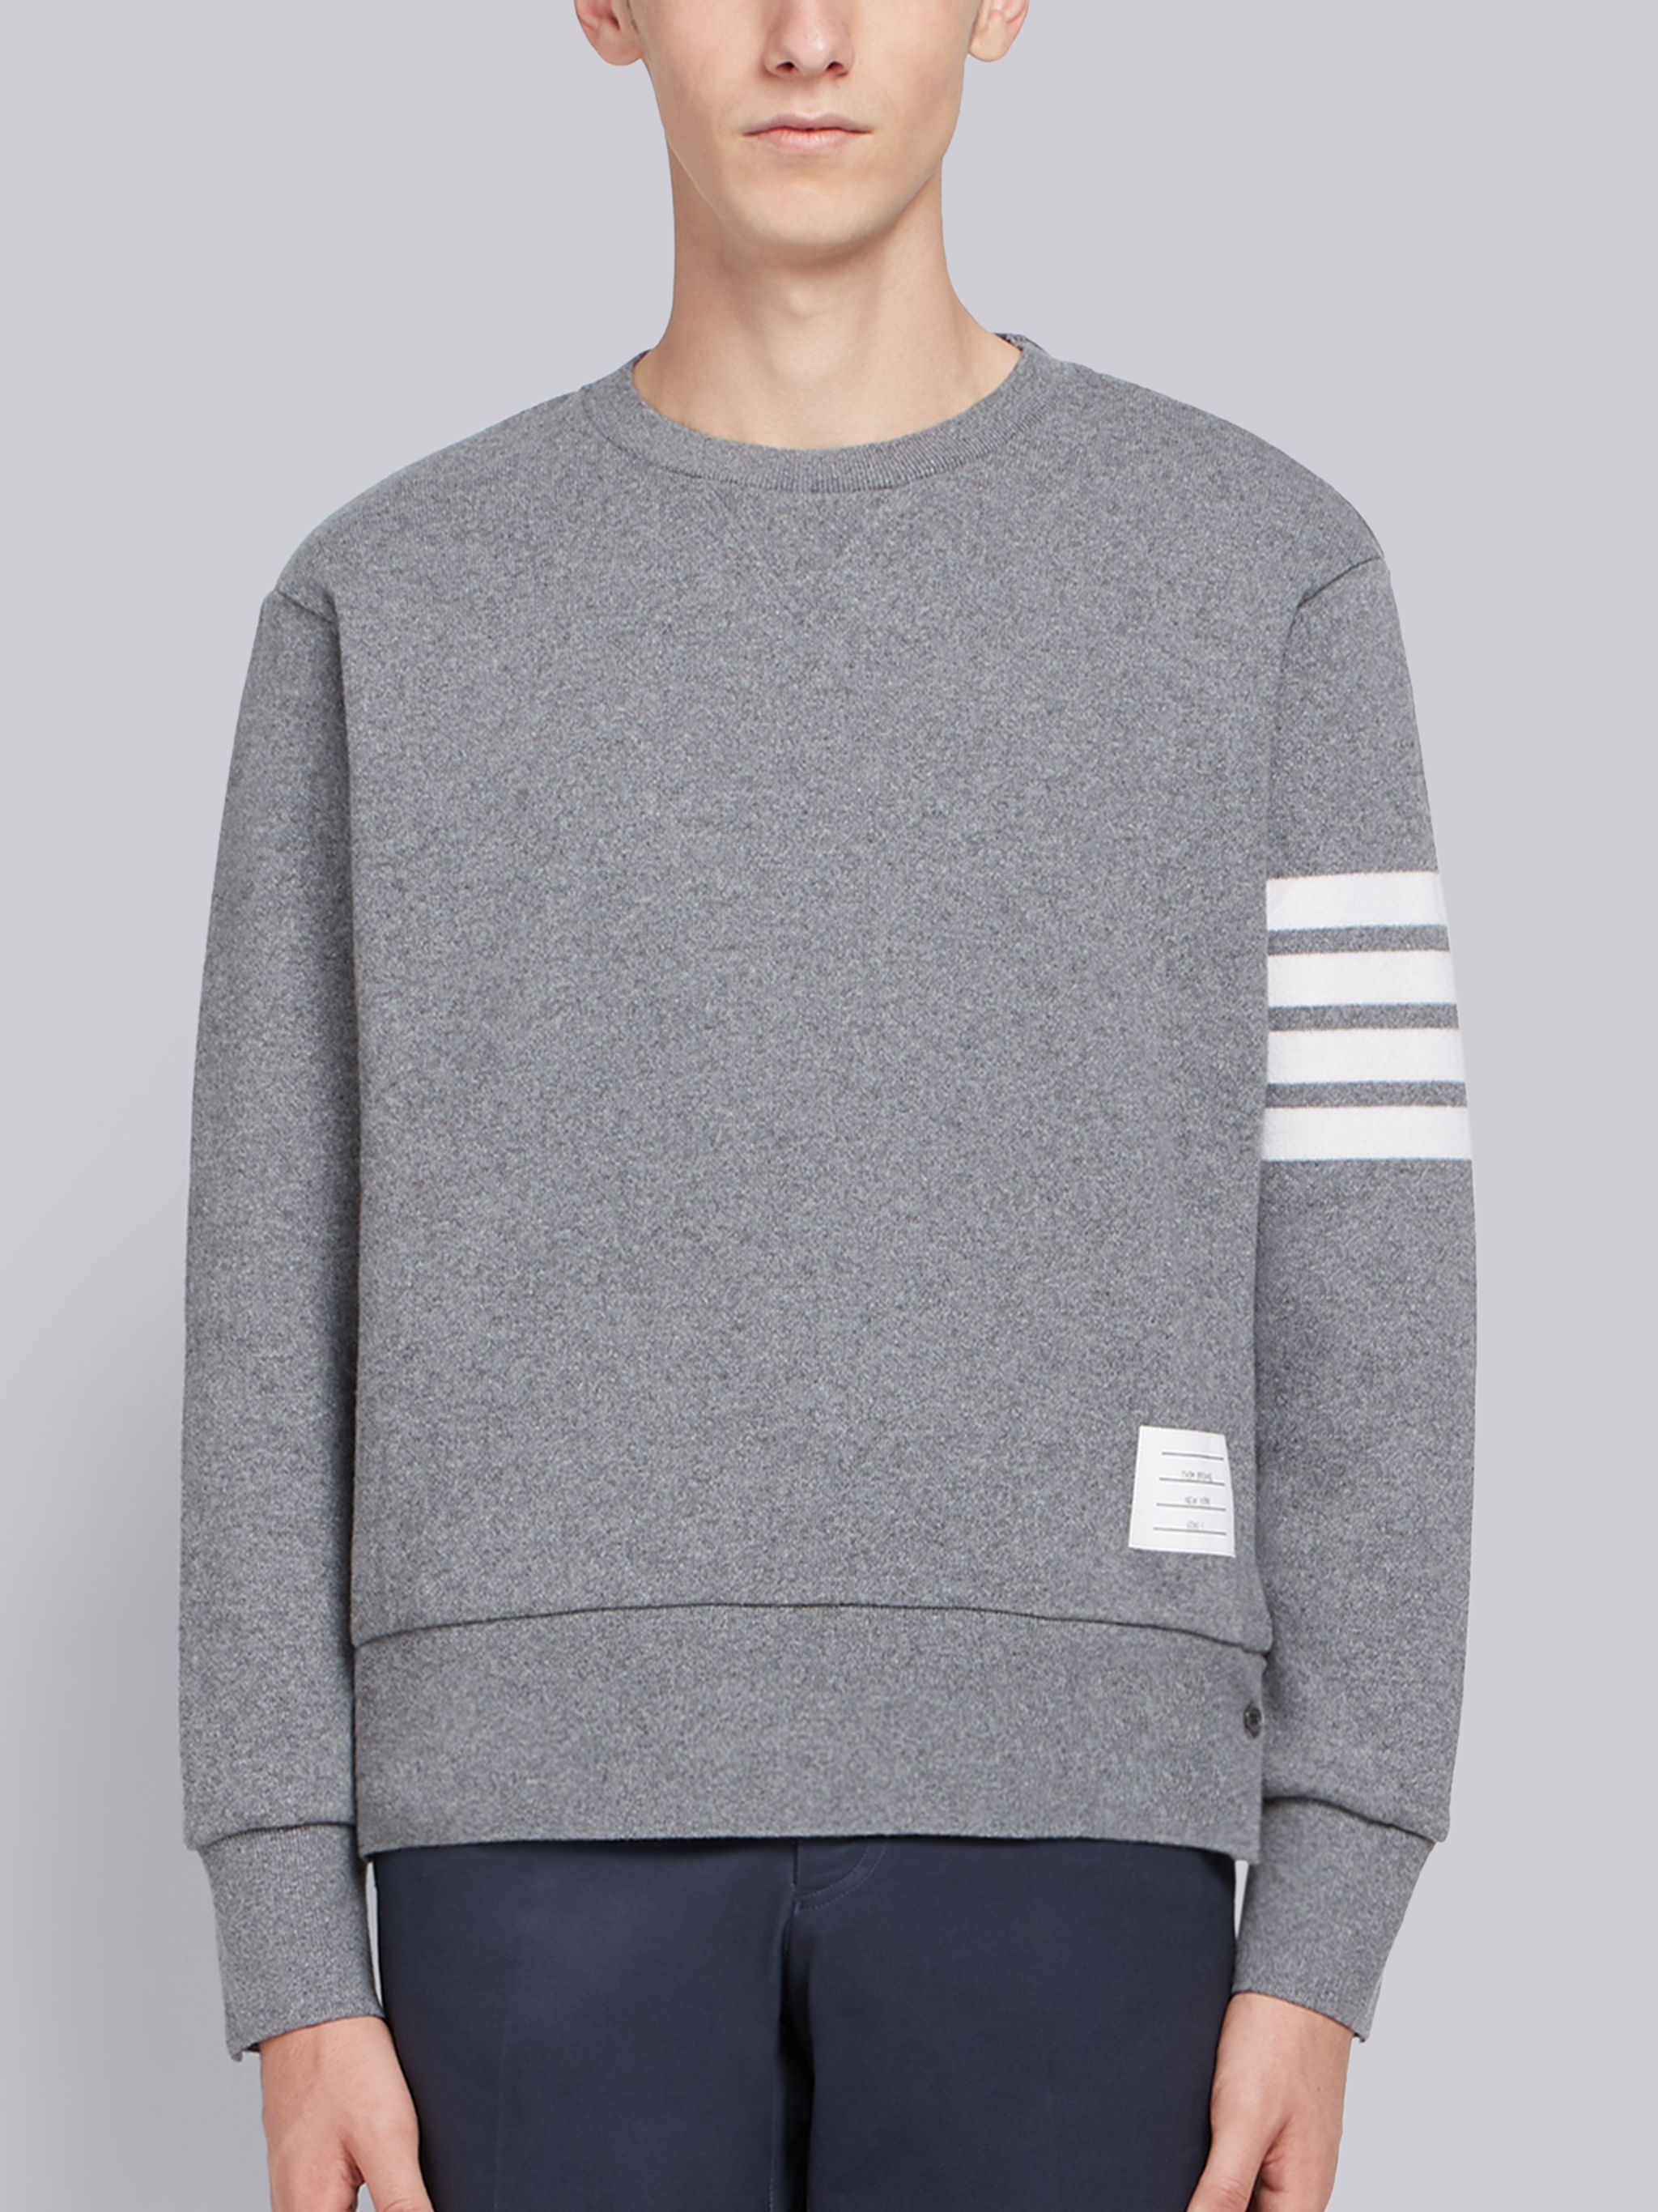 Relaxed Fit Engineered 4-Bar Stripe Cashmere Shell Sweatshirt - 1